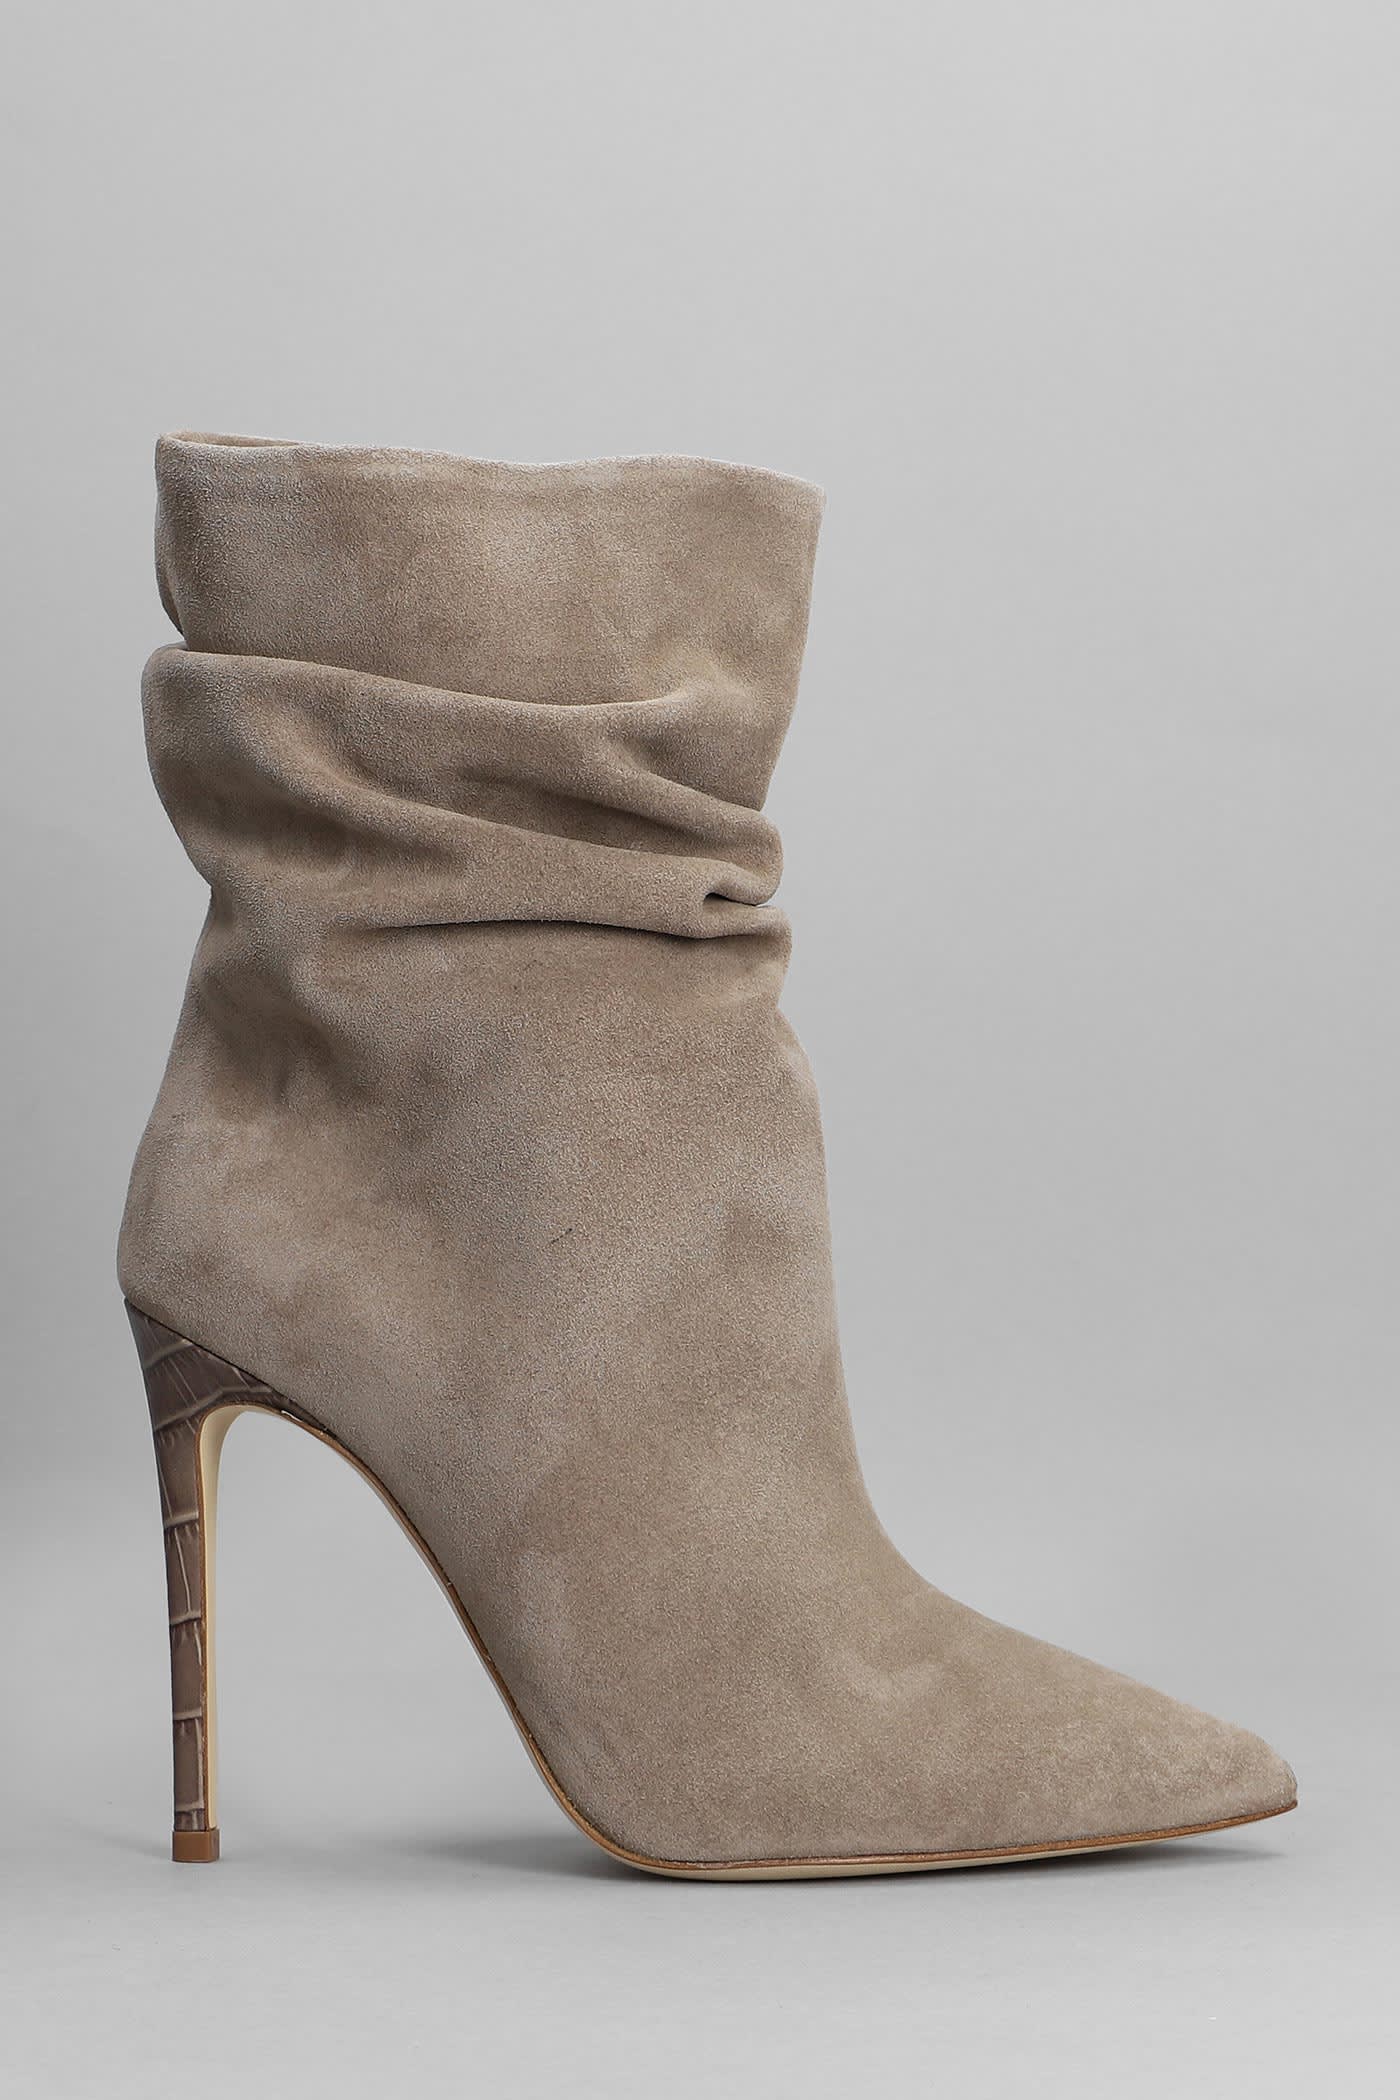 Paris Texas High Heels Ankle Boots In Taupe Suede